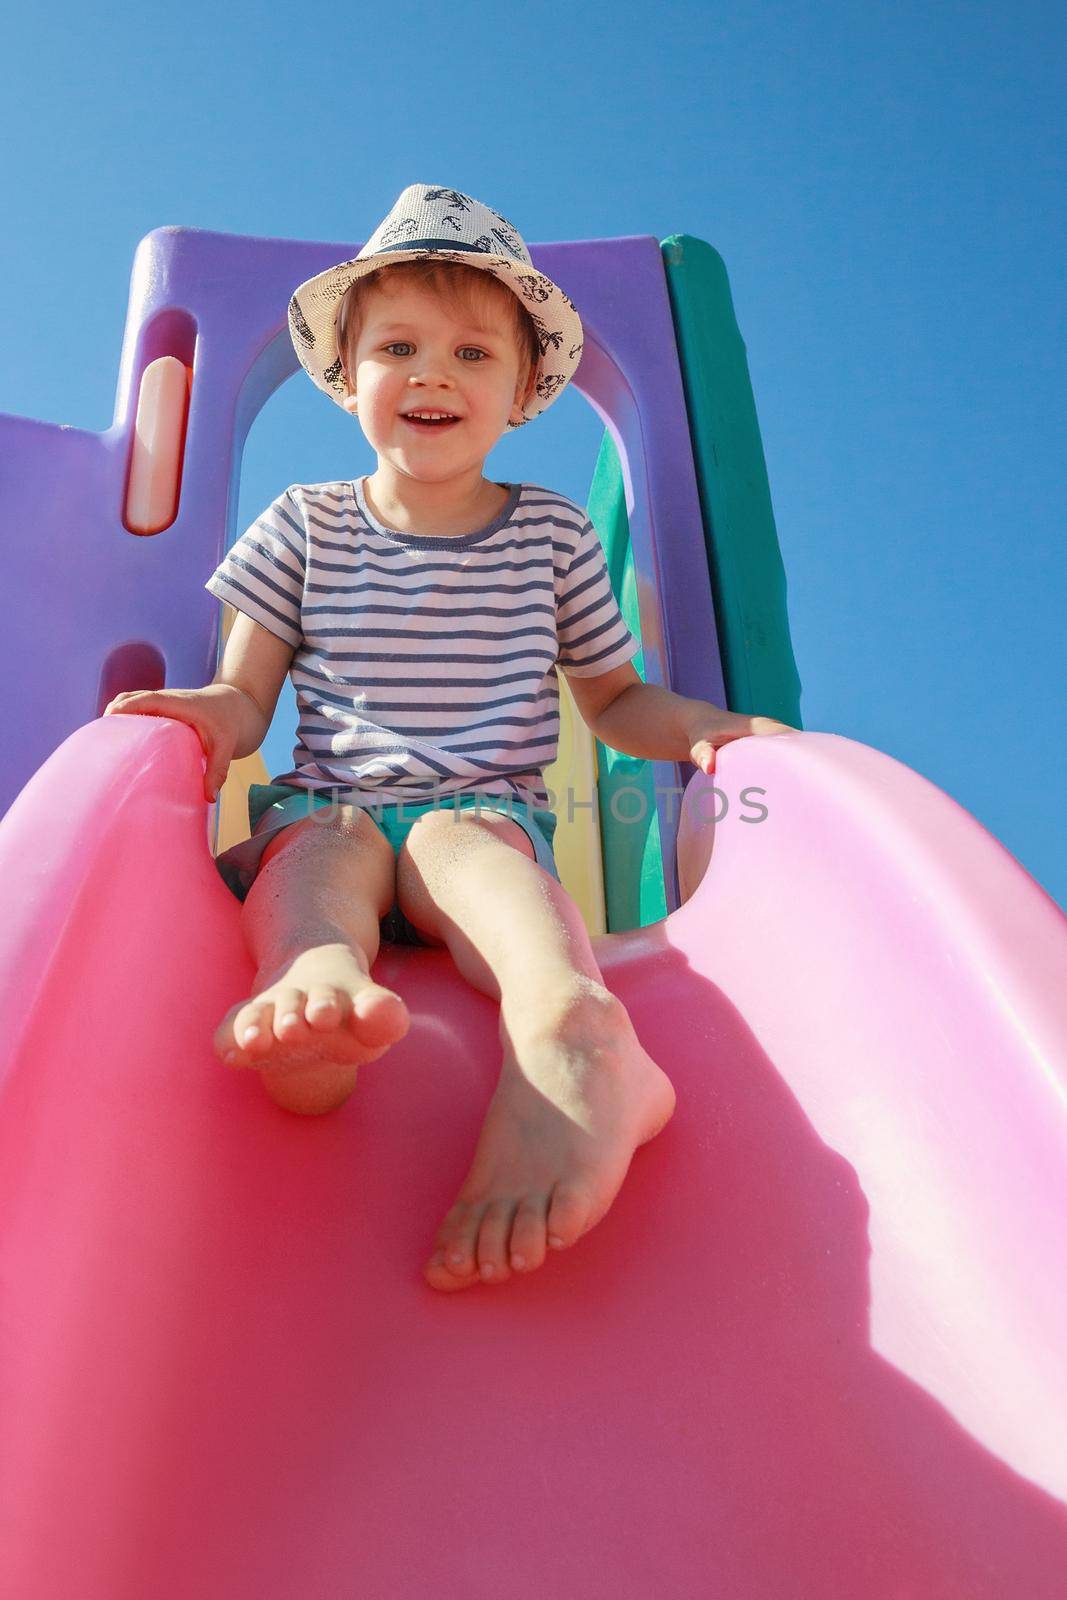 Happy child playing with pink slide on blue sky background. Playtime concept